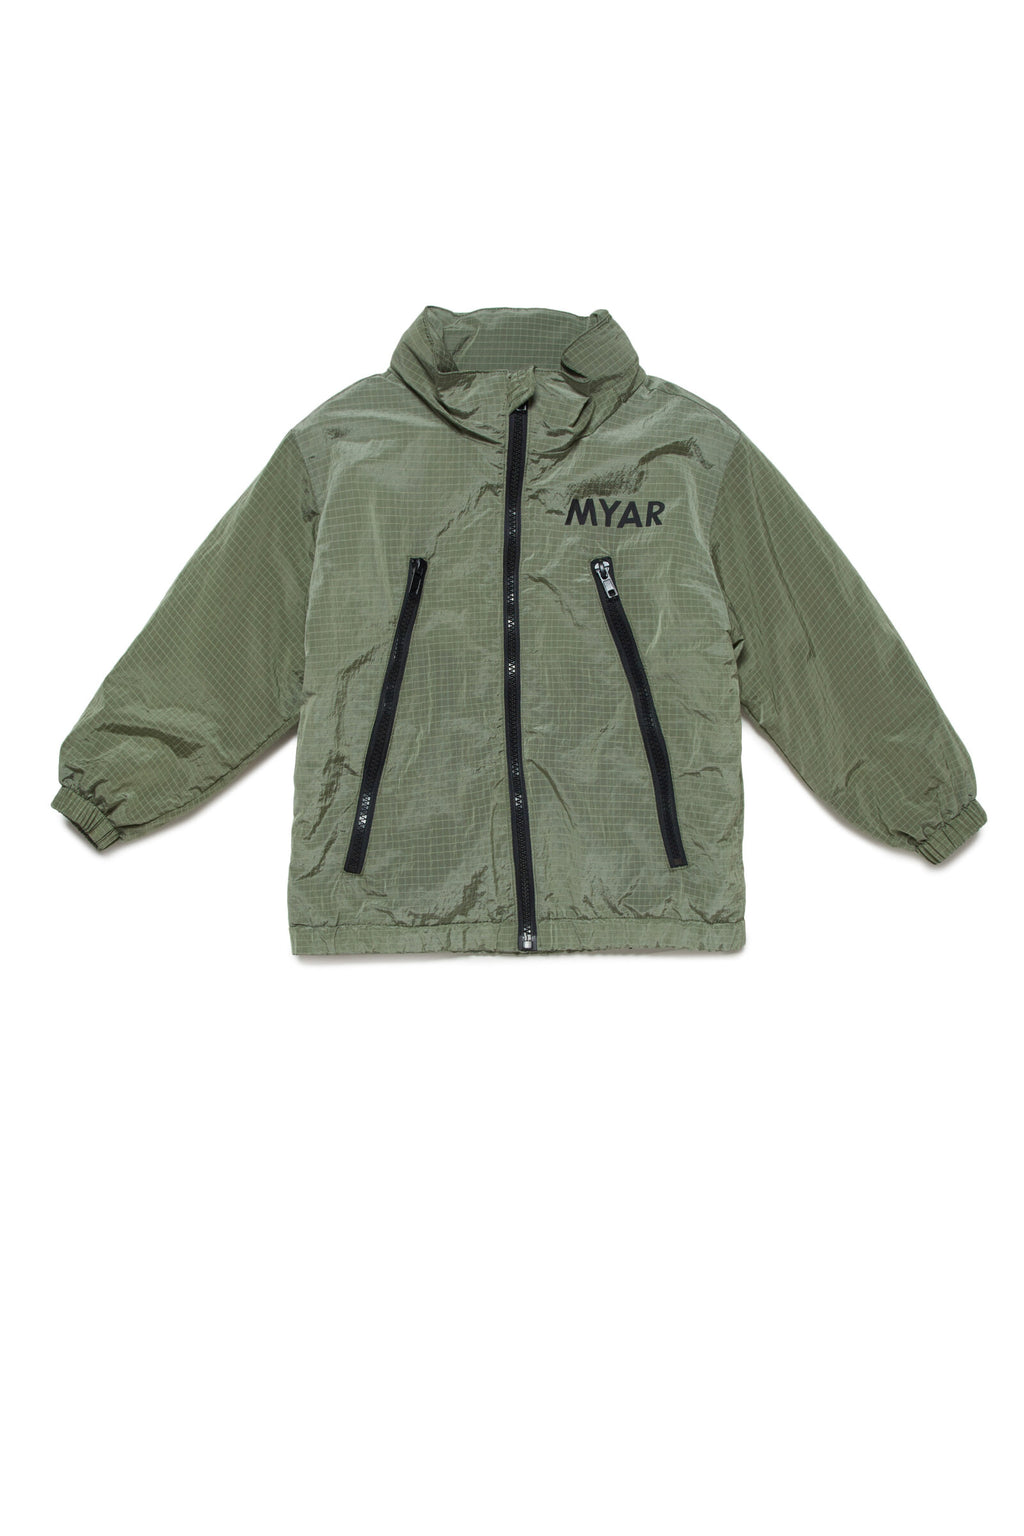 Deadstock green ripstop fabric jacket with concealed hood